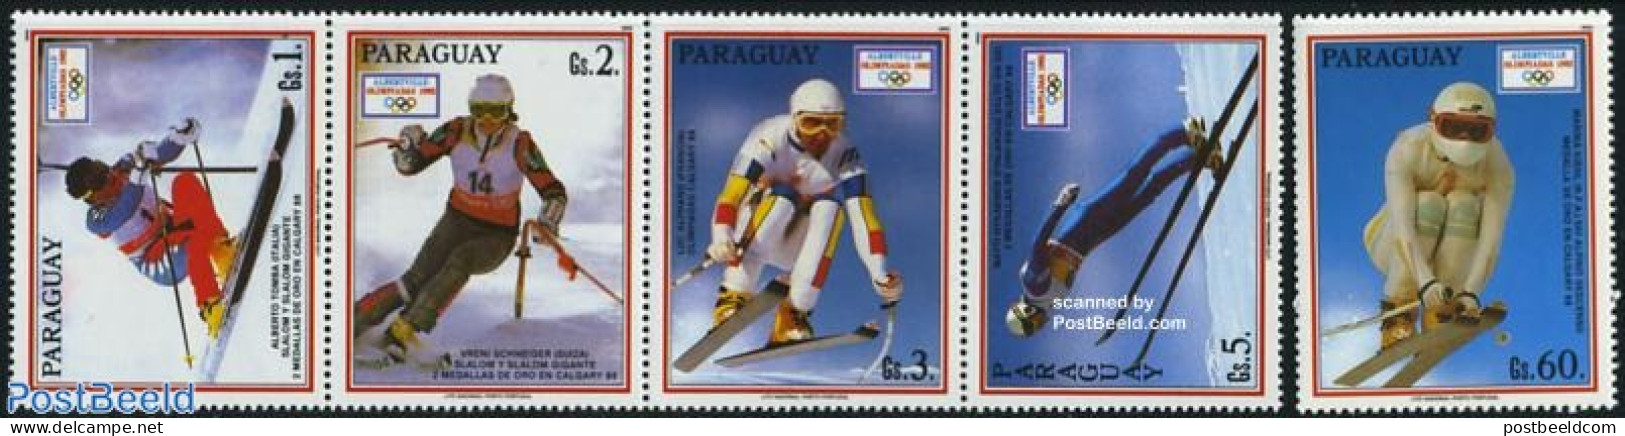 Paraguay 1990 Olympic Winter Games 5v, Mint NH, Sport - Olympic Winter Games - Skiing - Skiing